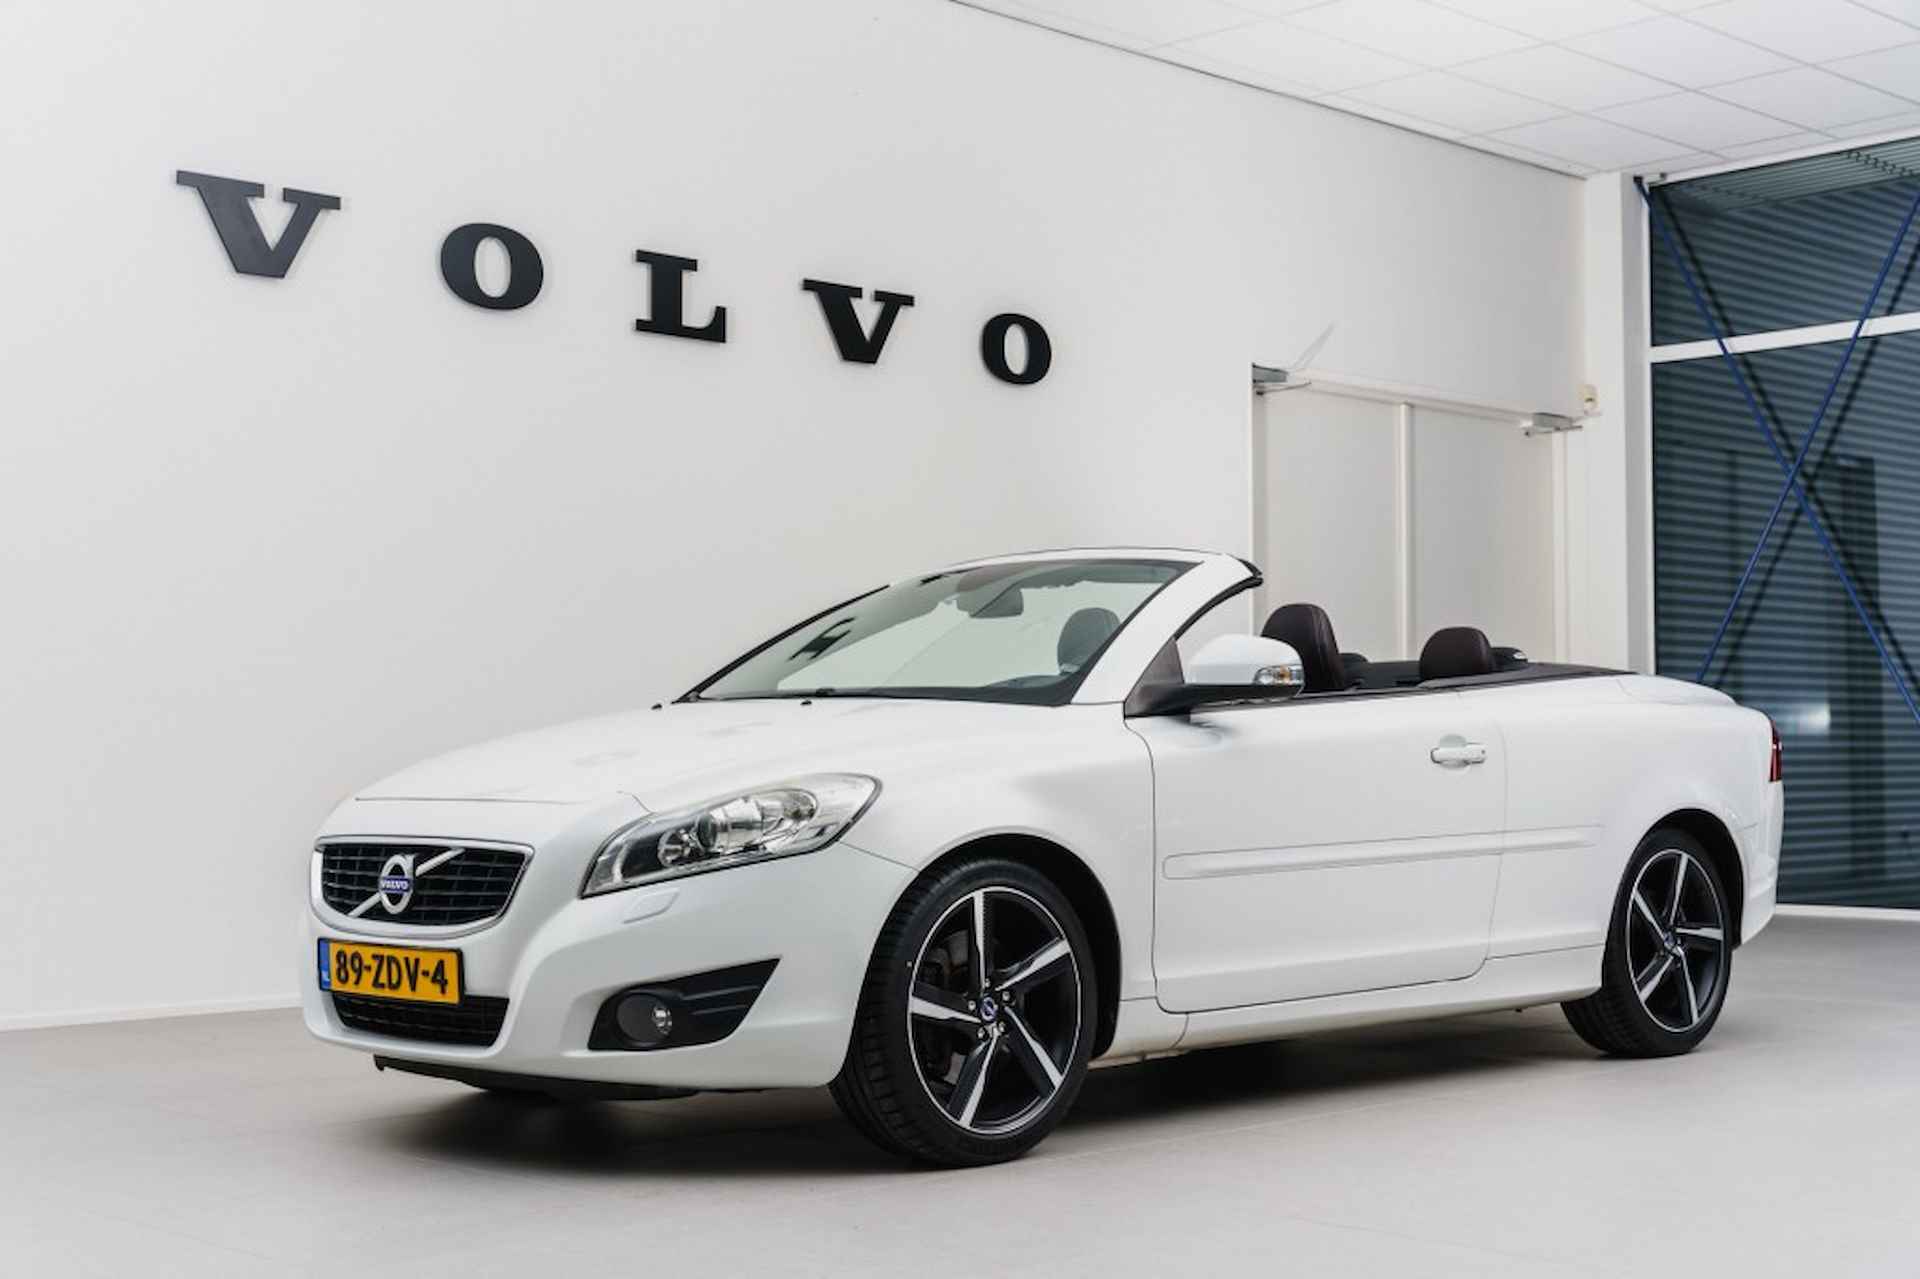 VOLVO C70 T5 Geartronic Tourer - 1/25